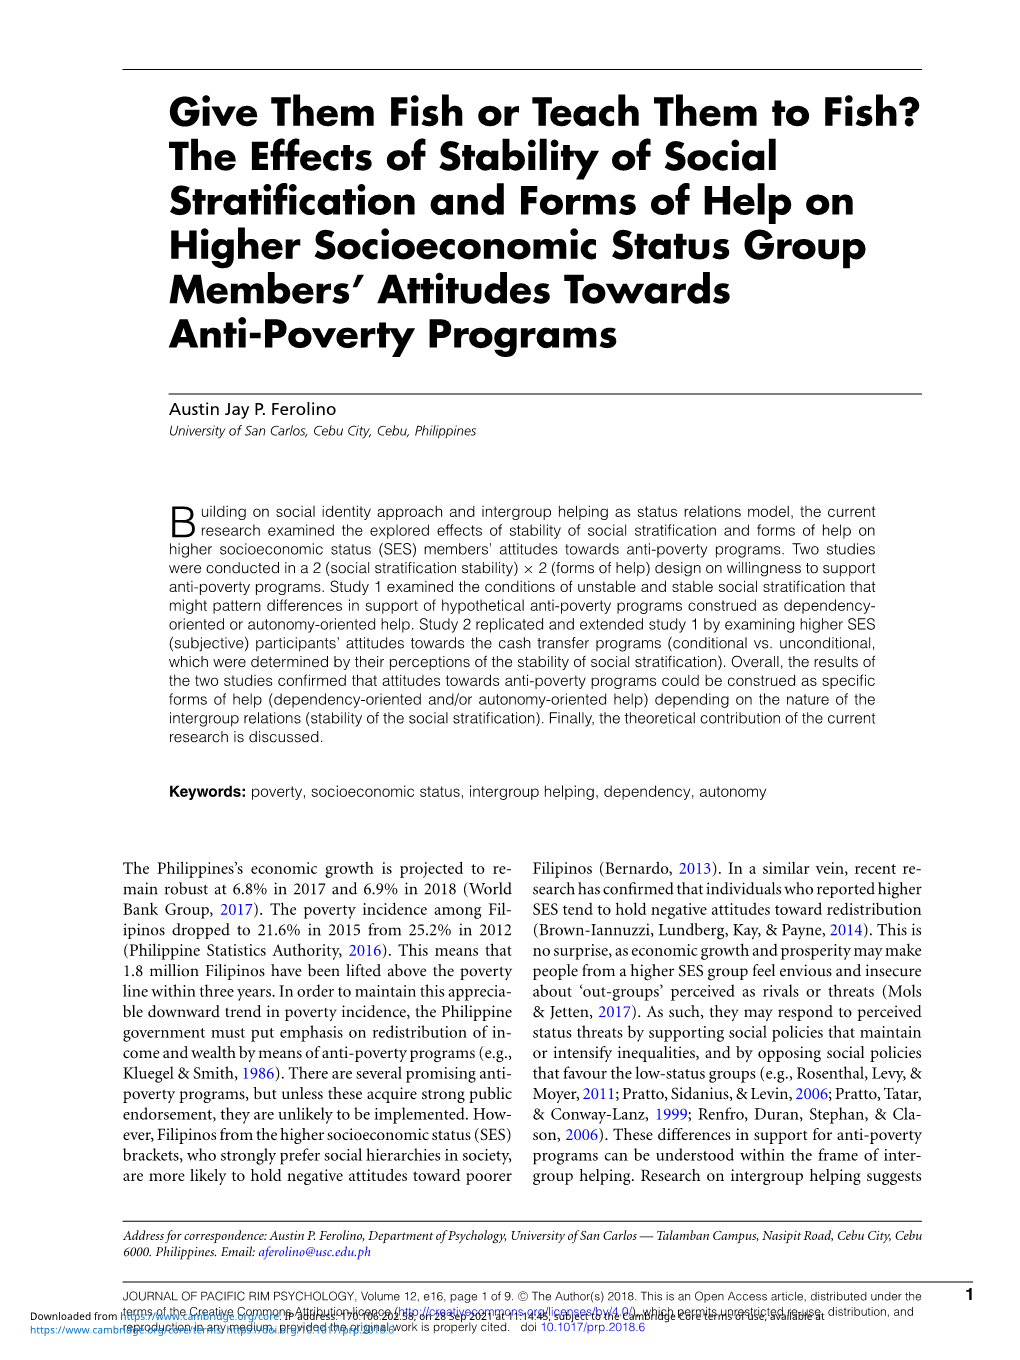 The Effects of Stability of Social Stratification and Forms of Help on Higher Socioeconomi